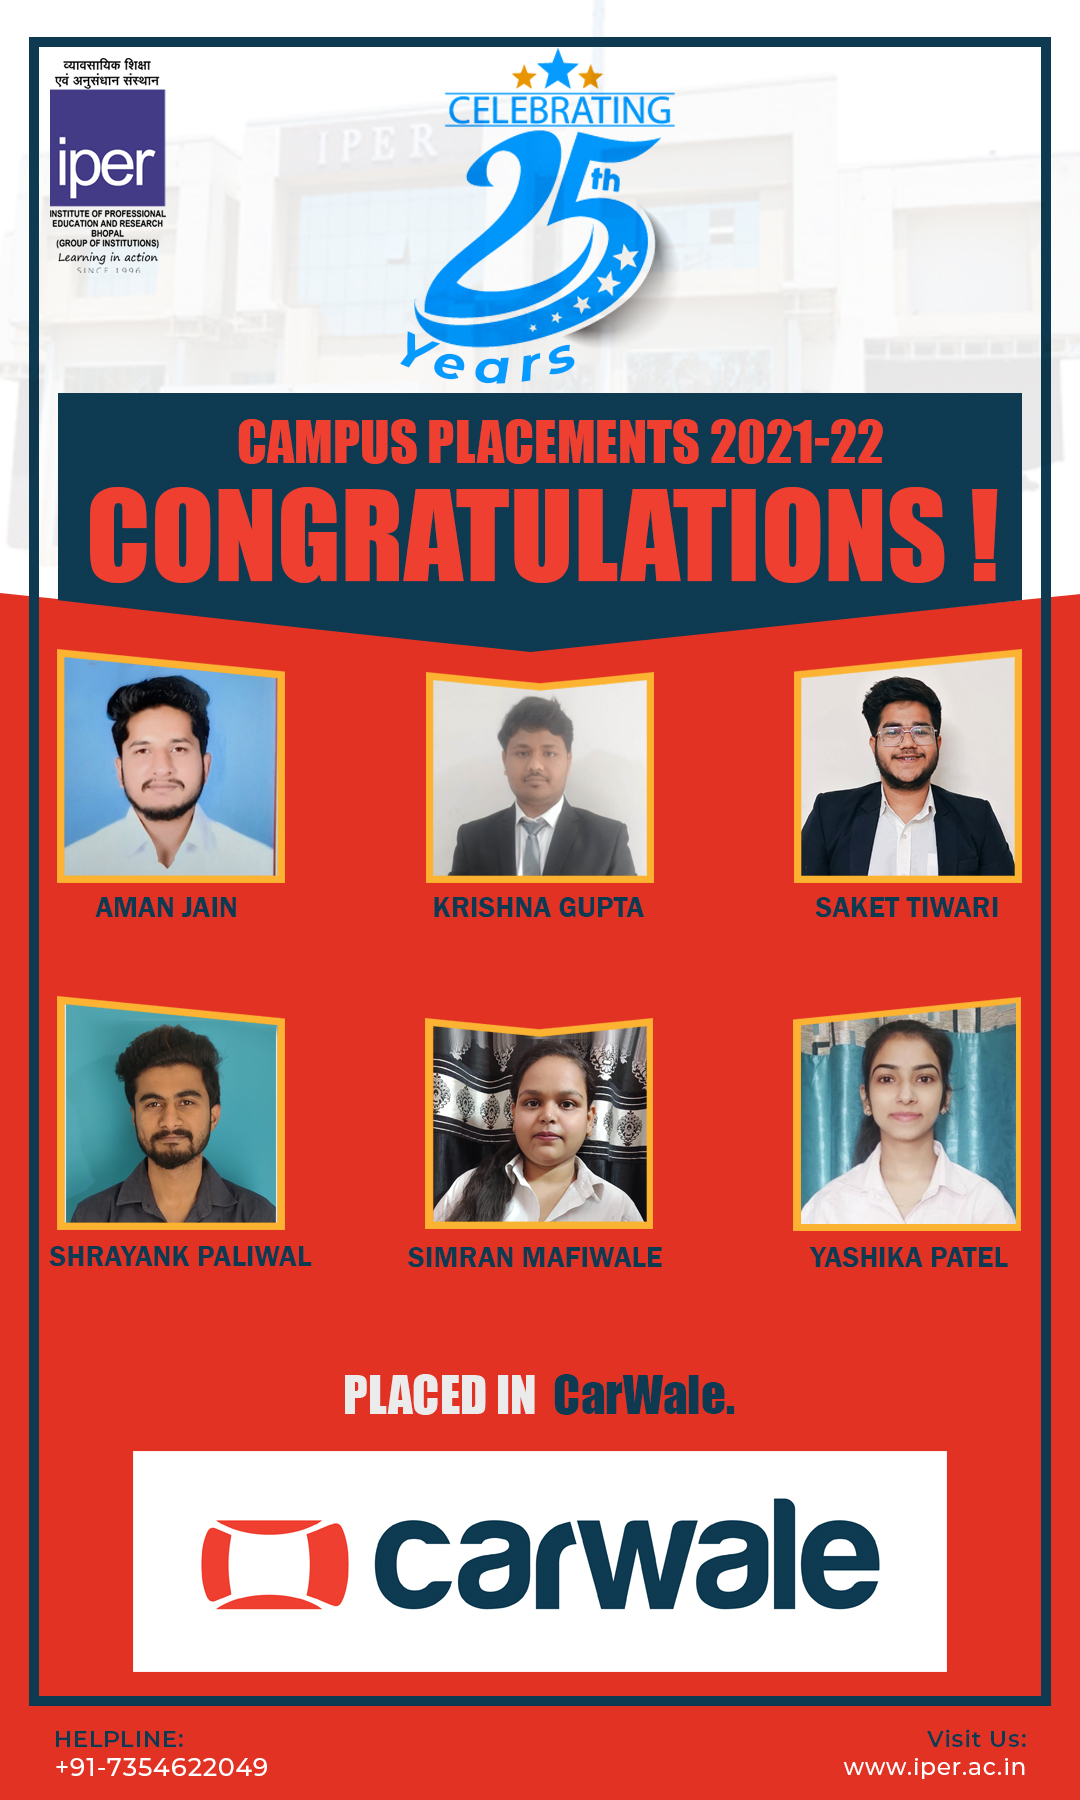 CAMPUS PLACEMENTS 2021-22 (Layout 1)Carwale